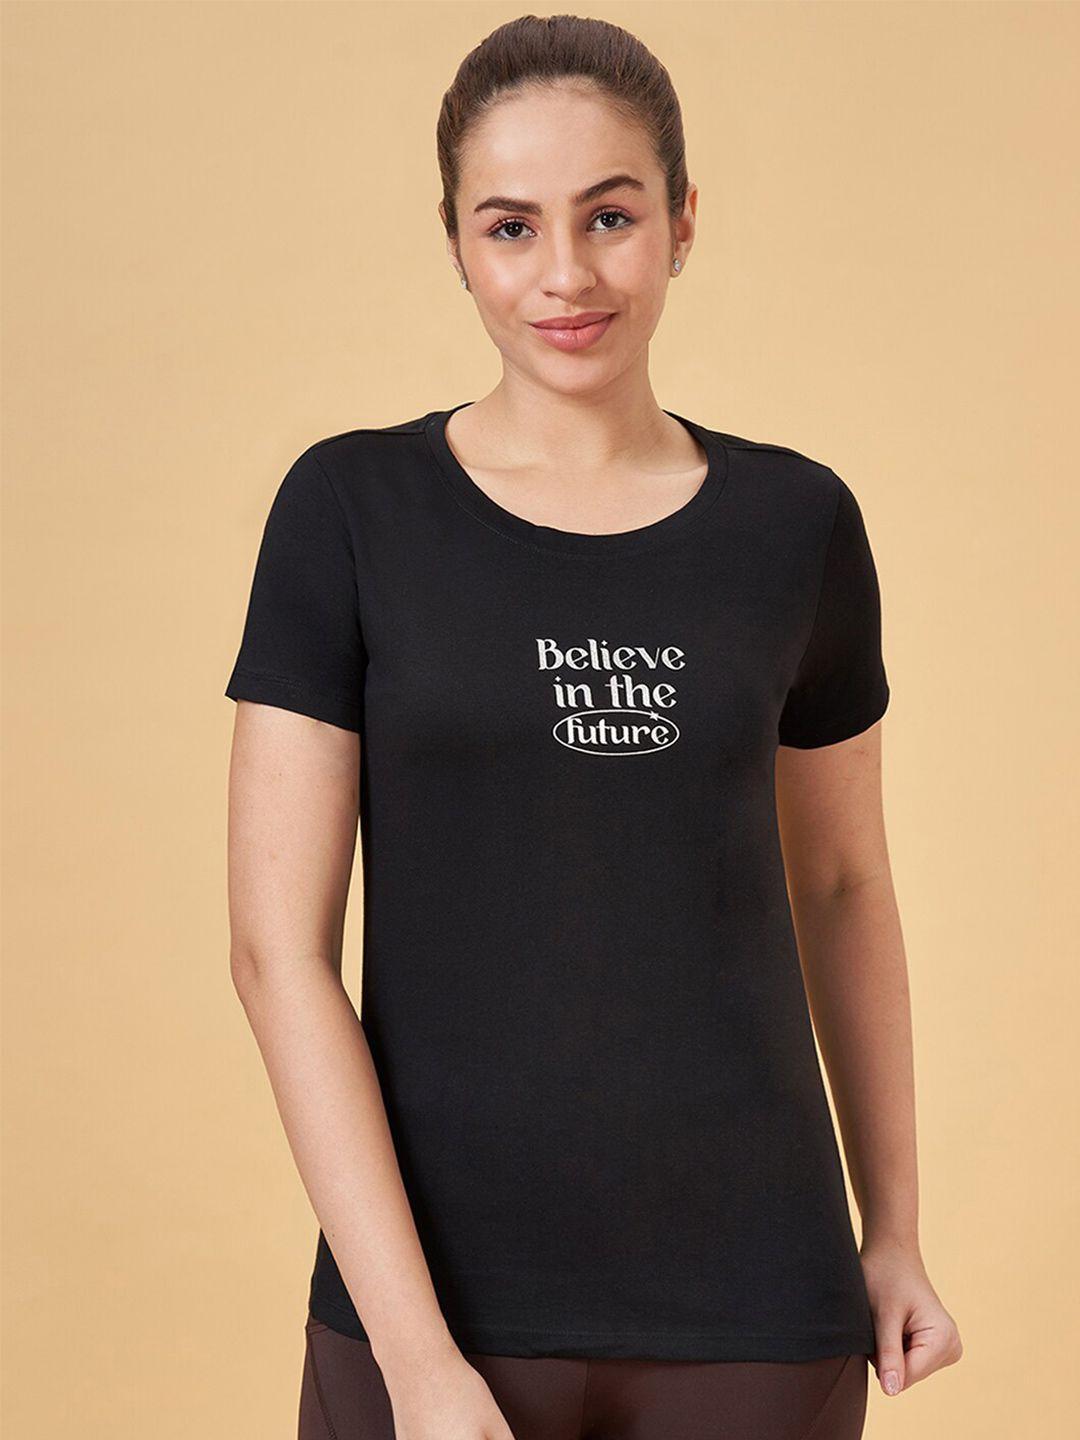 ajile-by-pantaloons-women-typography-extended-sleeves-t-shirt